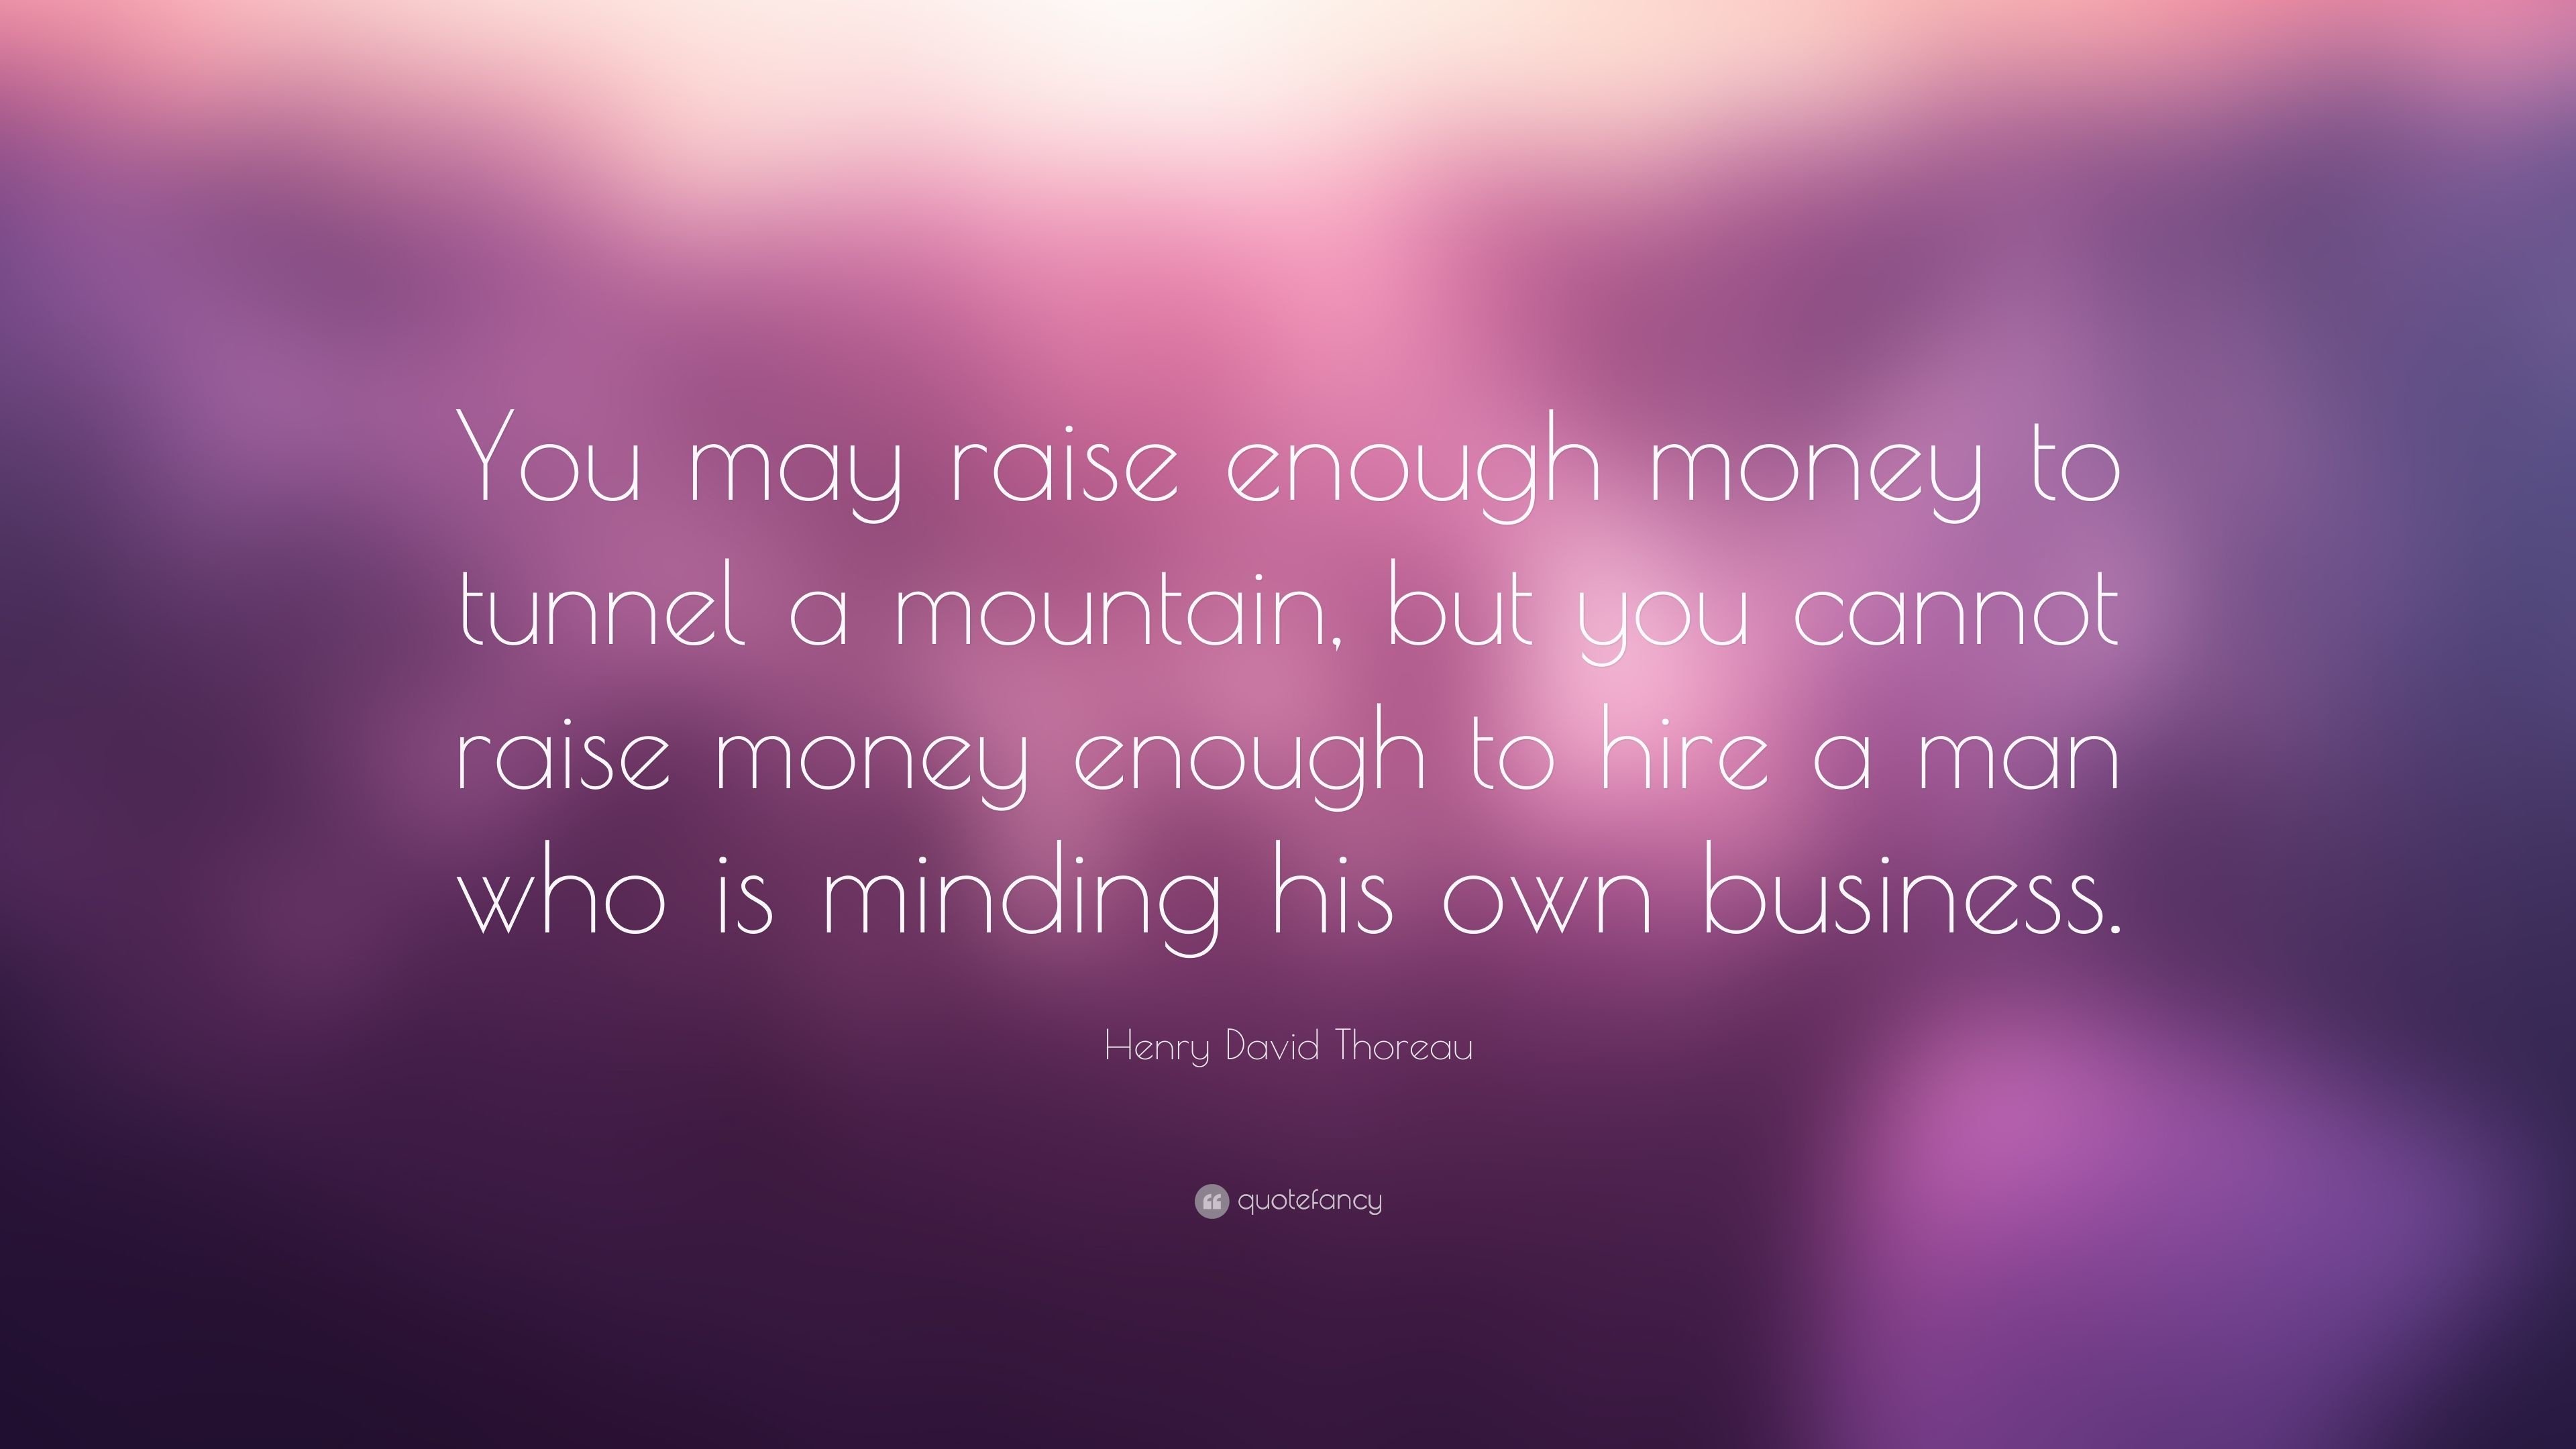 3840x2160 Henry David Thoreau Quote: “You may raise enough money to tunnel a mountain,